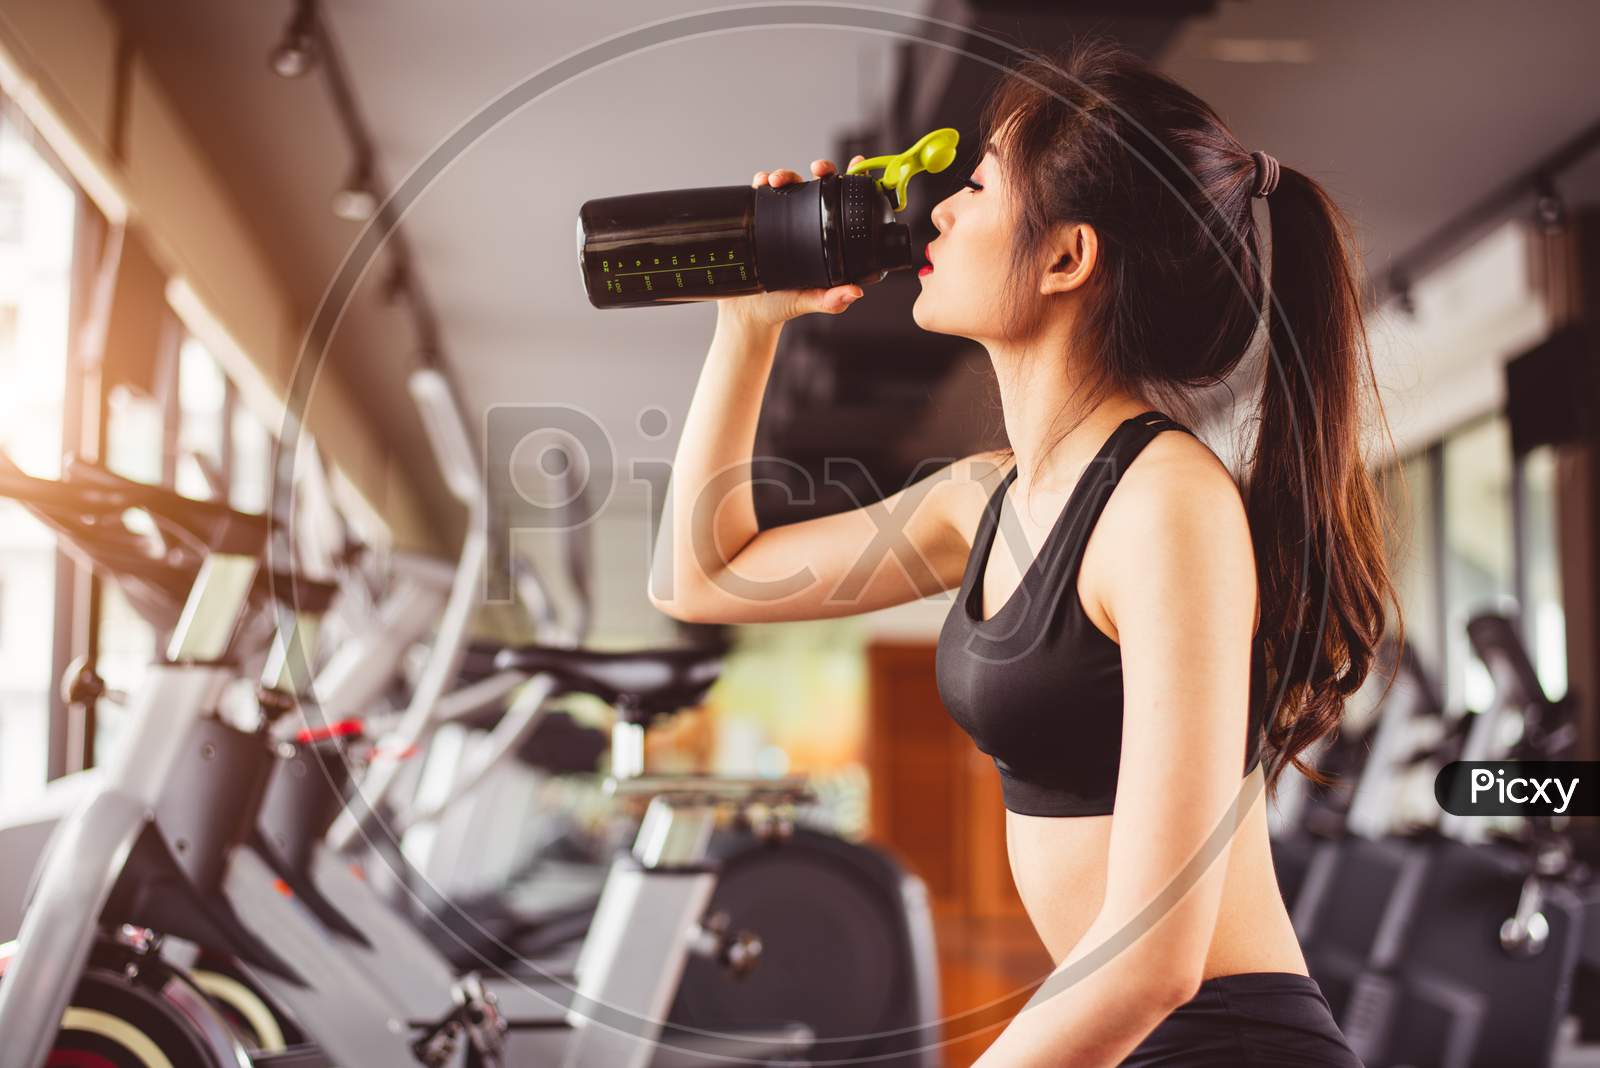 Asian Beautiful Woman Drinking Protein Shake Or Drinking Water In Sport Fitness Training Gym. Sports And People Concept. Fitness And Workout Theme. Girl Having Activity On Condominium Or Apartment